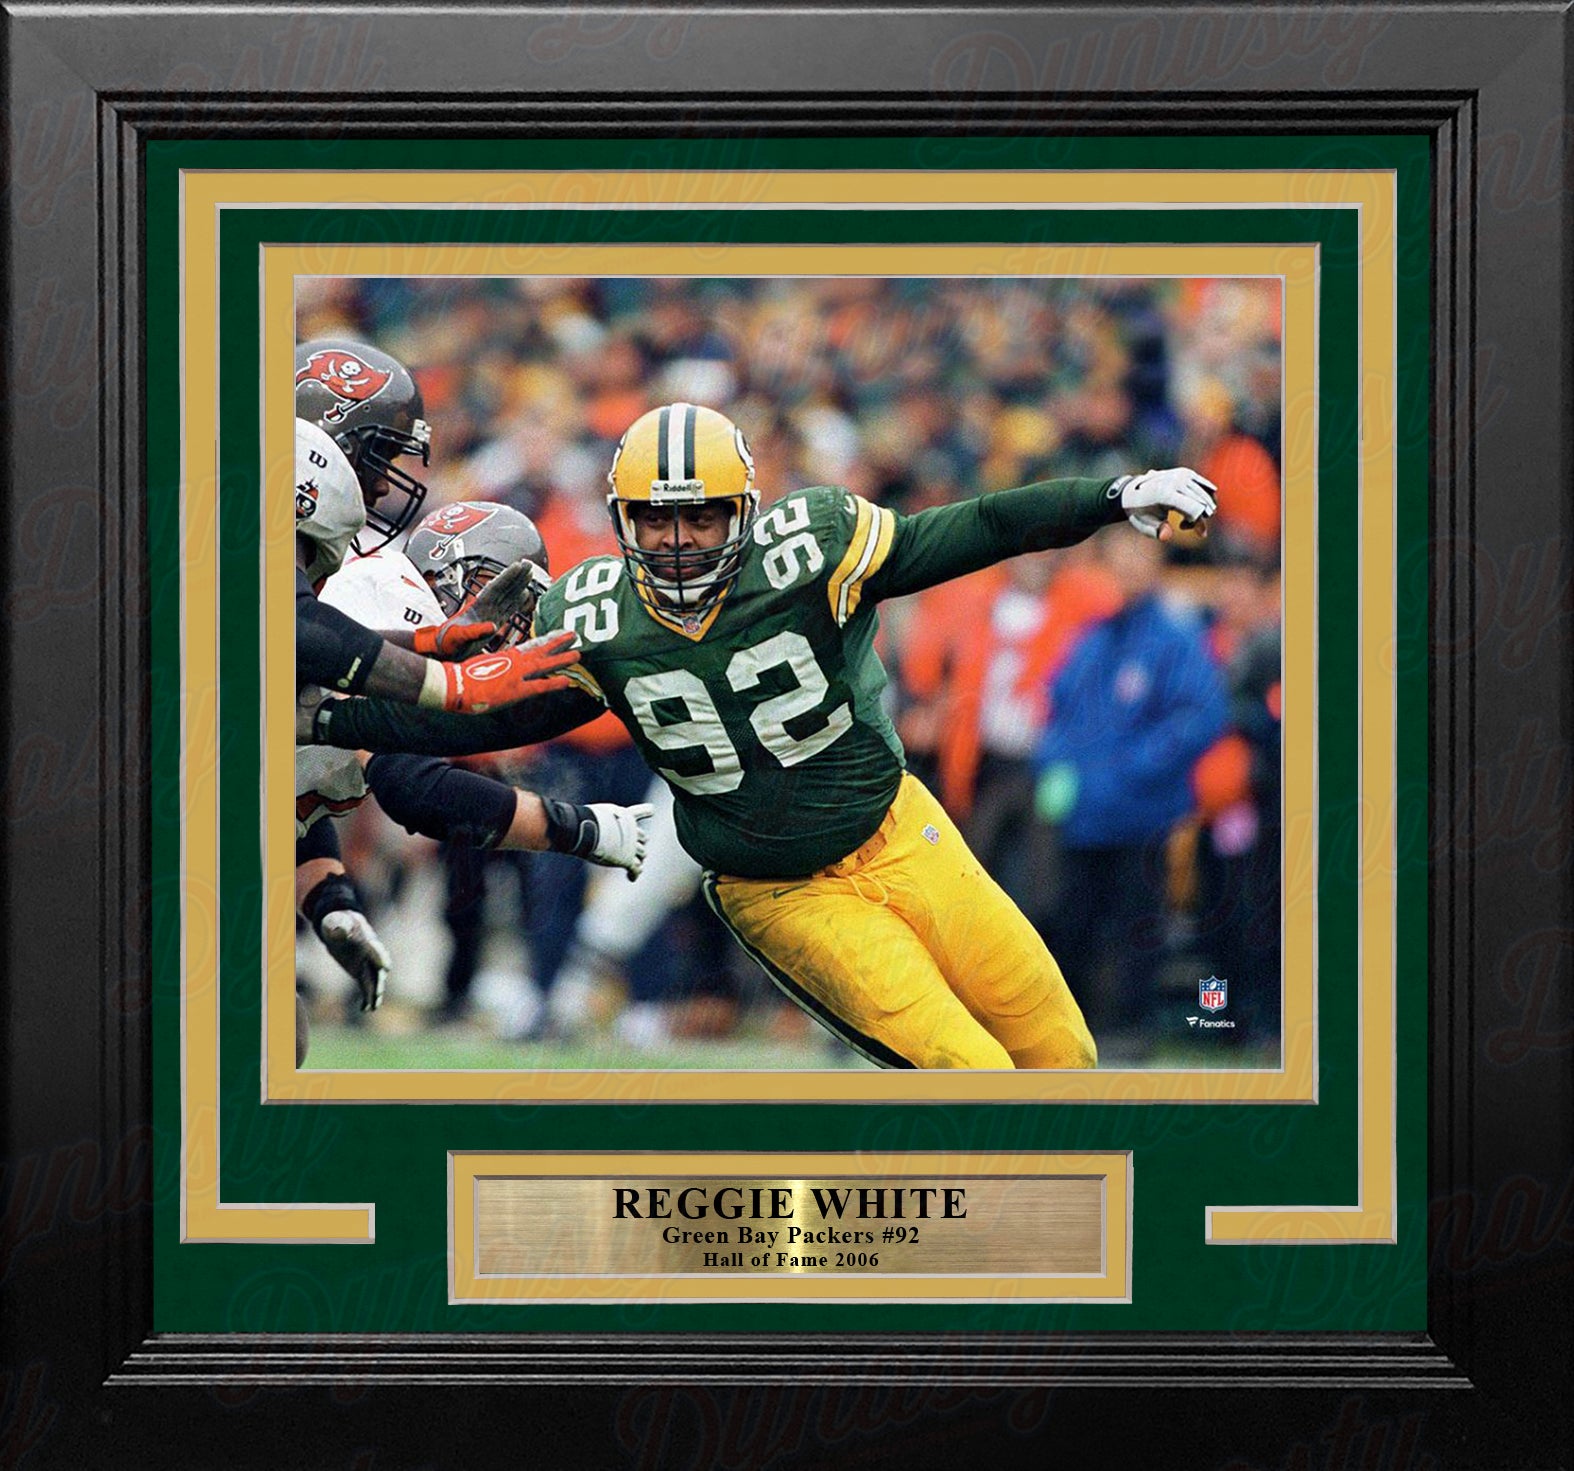 Reggie White in Action Green Bay Packers 8' x 10' Framed Football Photo -  Dynasty Sports & Framing